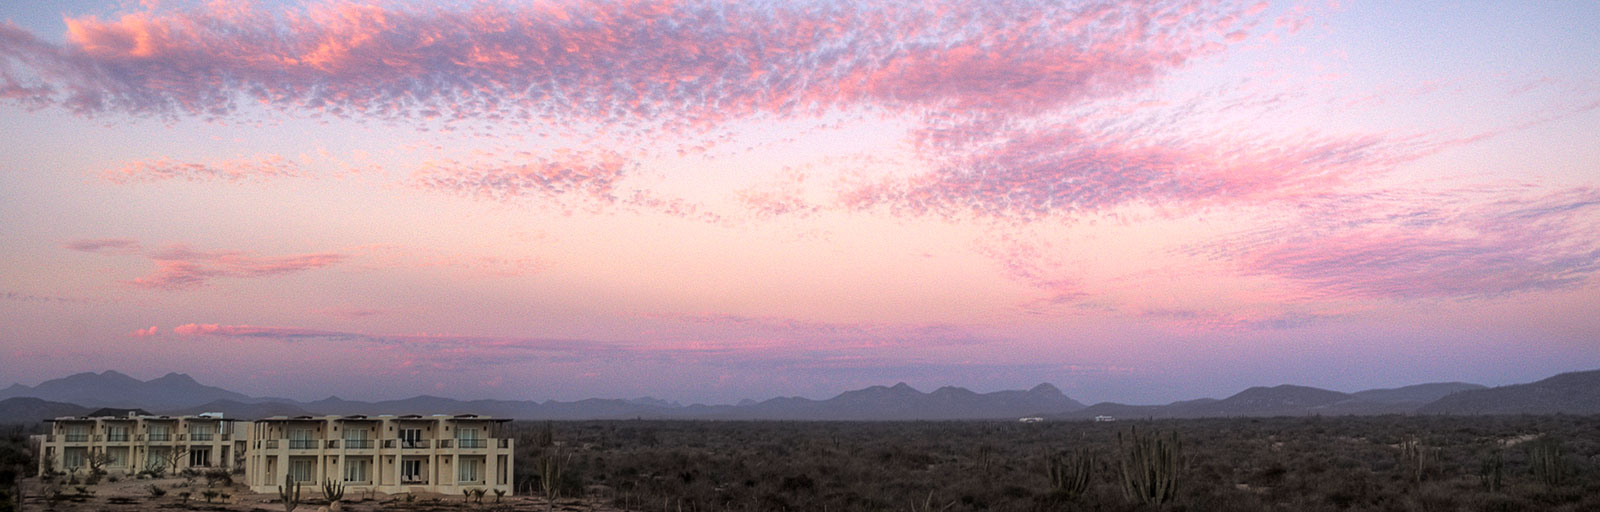 Yoga Retreat in Mexico: Sunset with Desert & Mountains